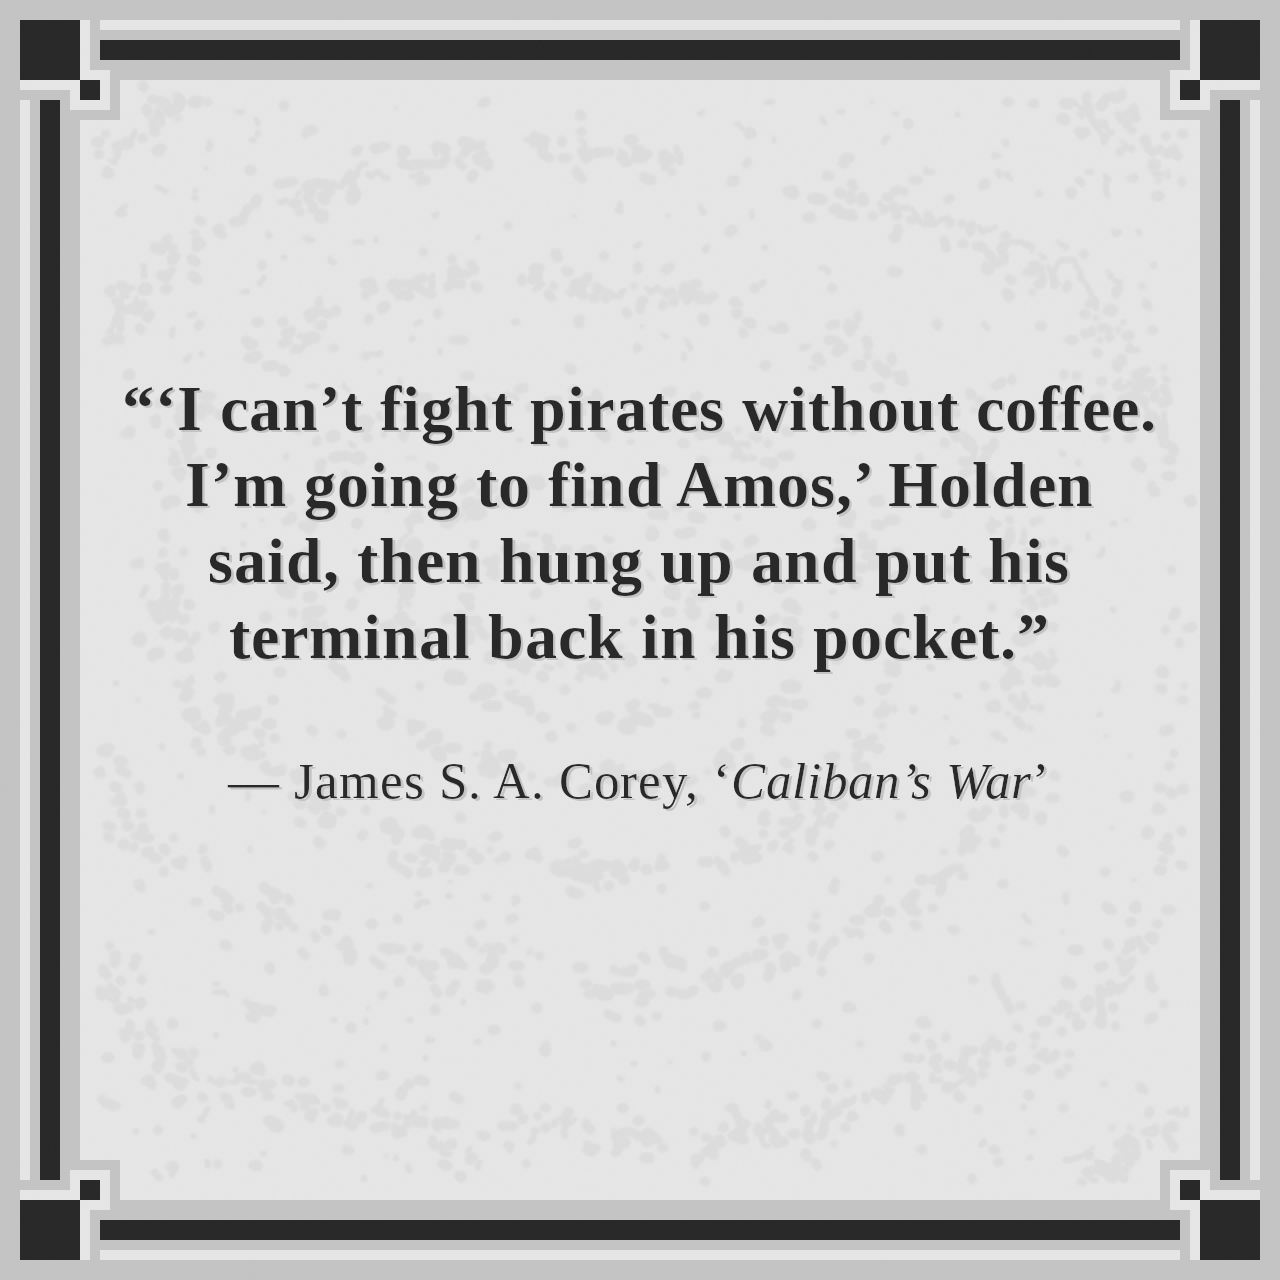 “‘I can’t fight pirates without coffee. I’m going to find Amos,’ Holden said, then hung up and put his terminal back in his pocket.”

— James S. A. Corey, ‘Caliban’s War’